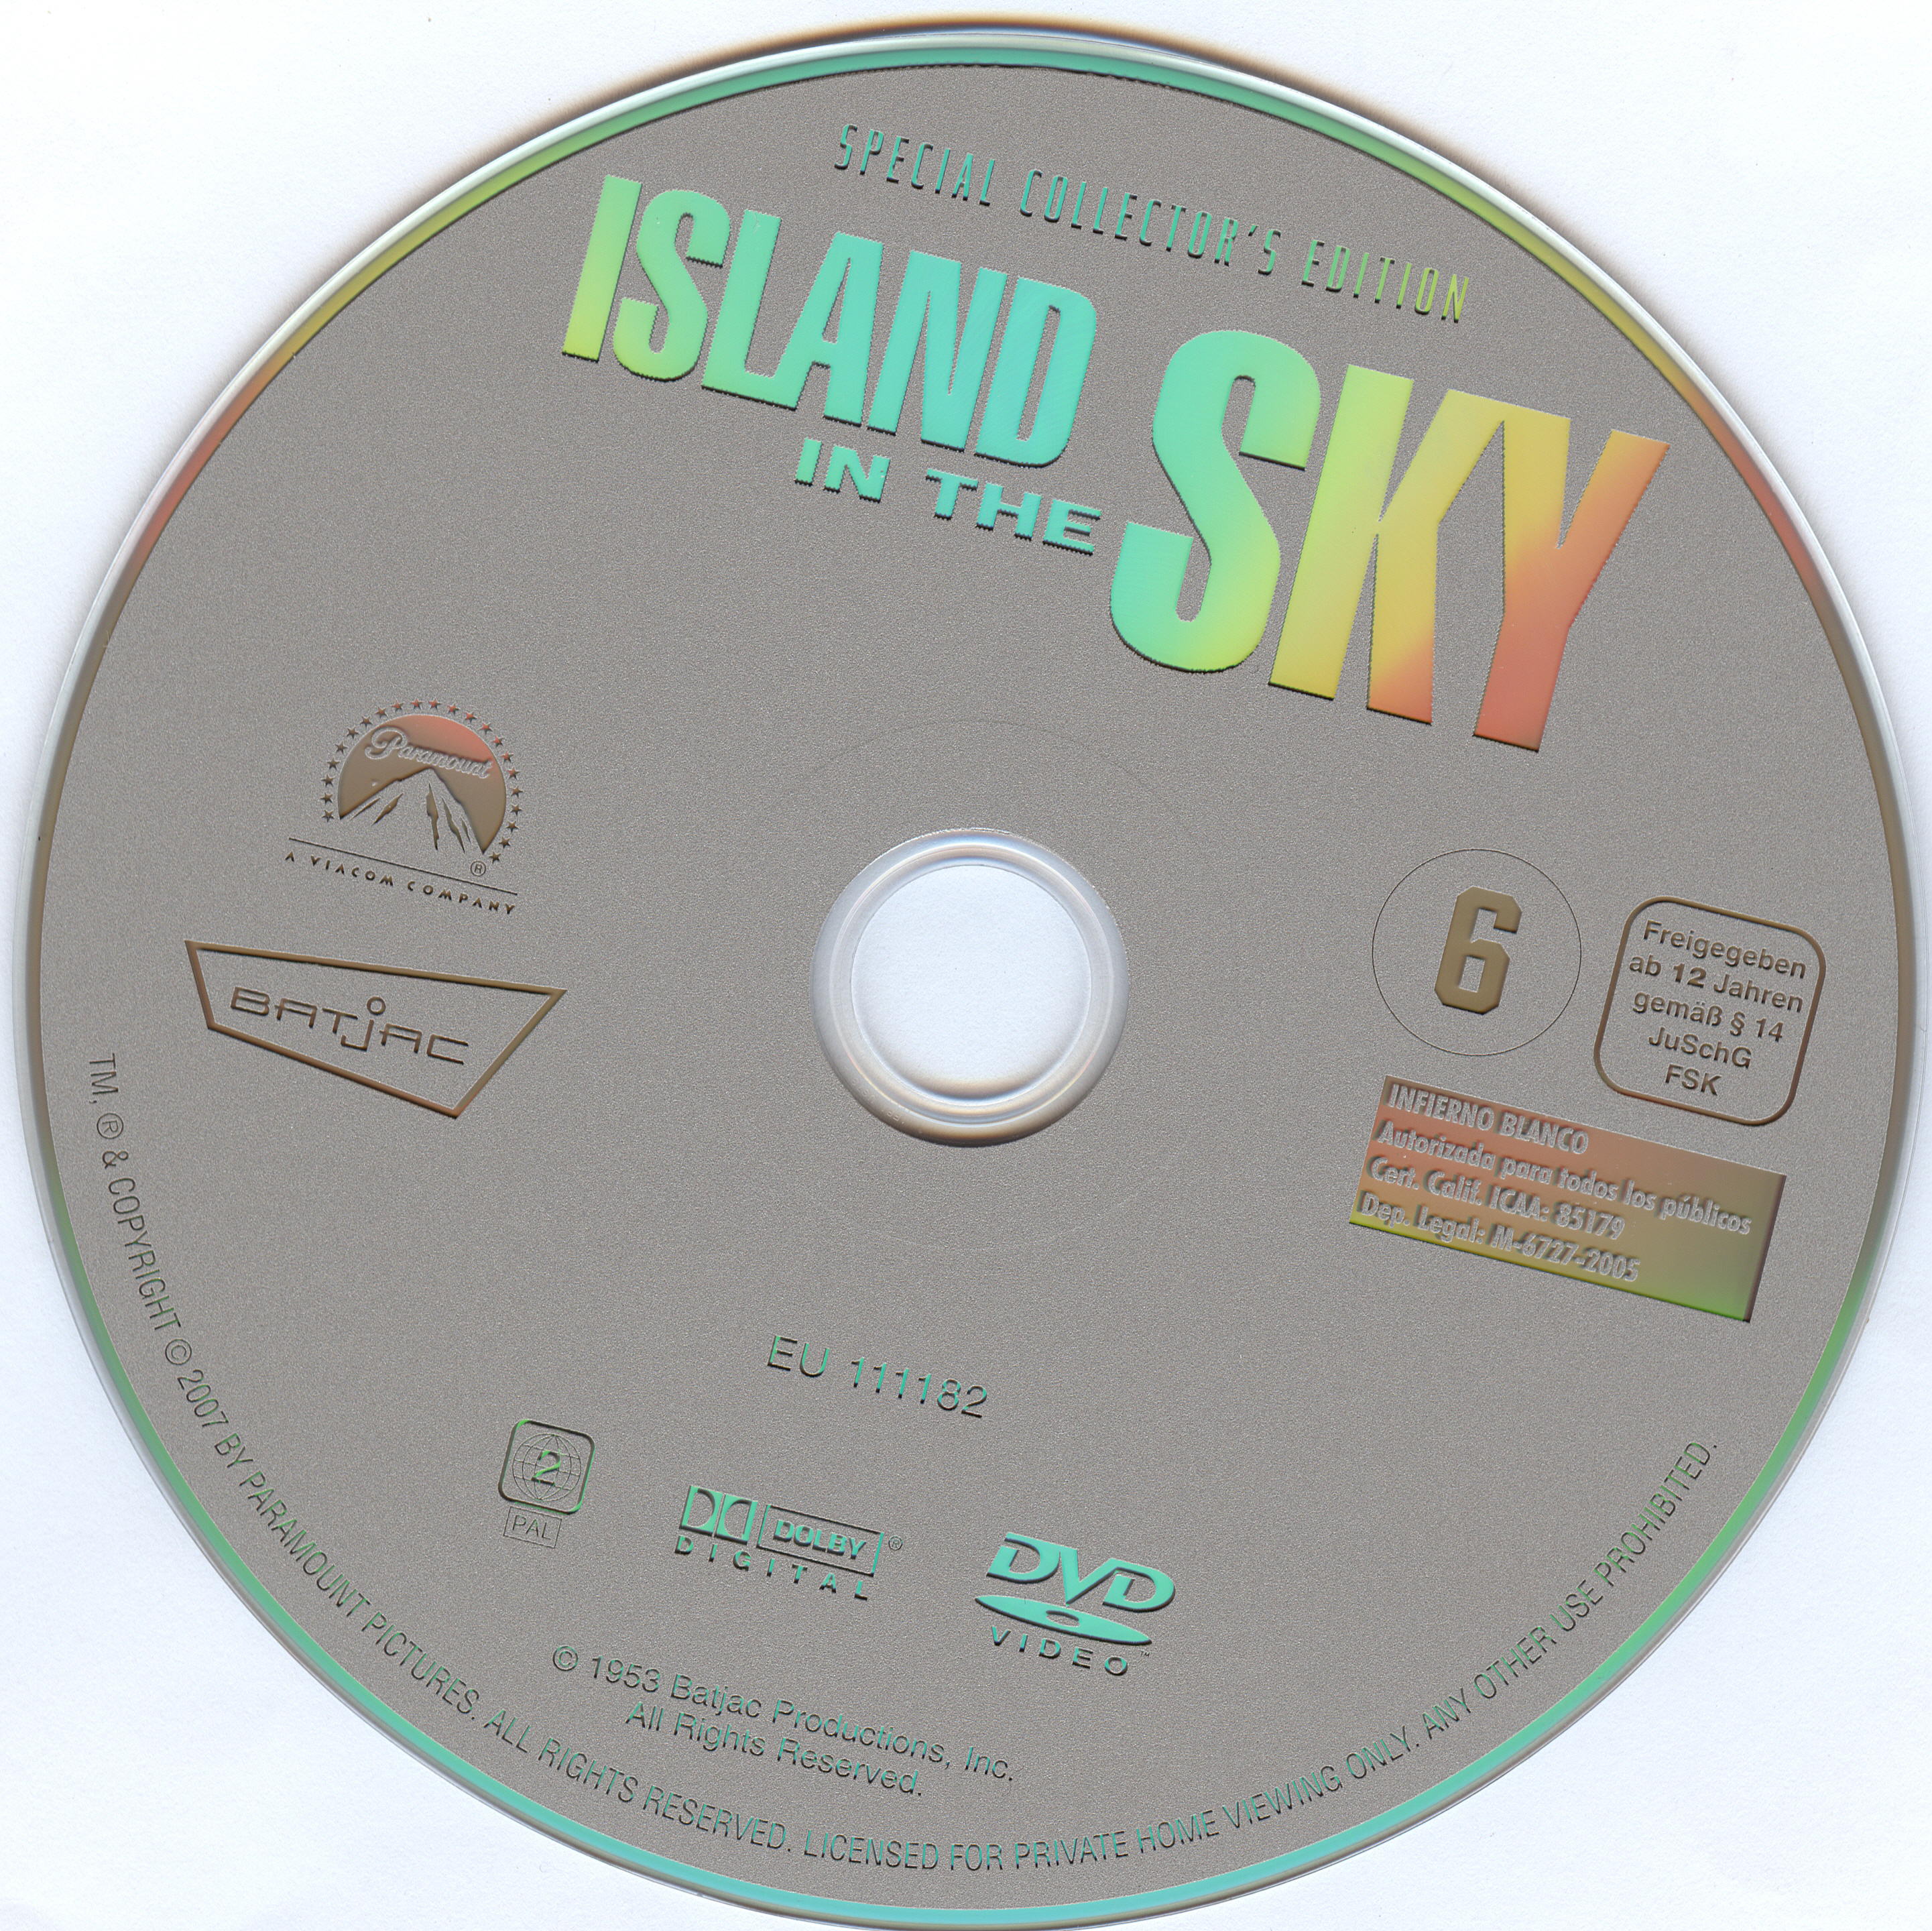 Island in the sky - aventure dans le grand nord